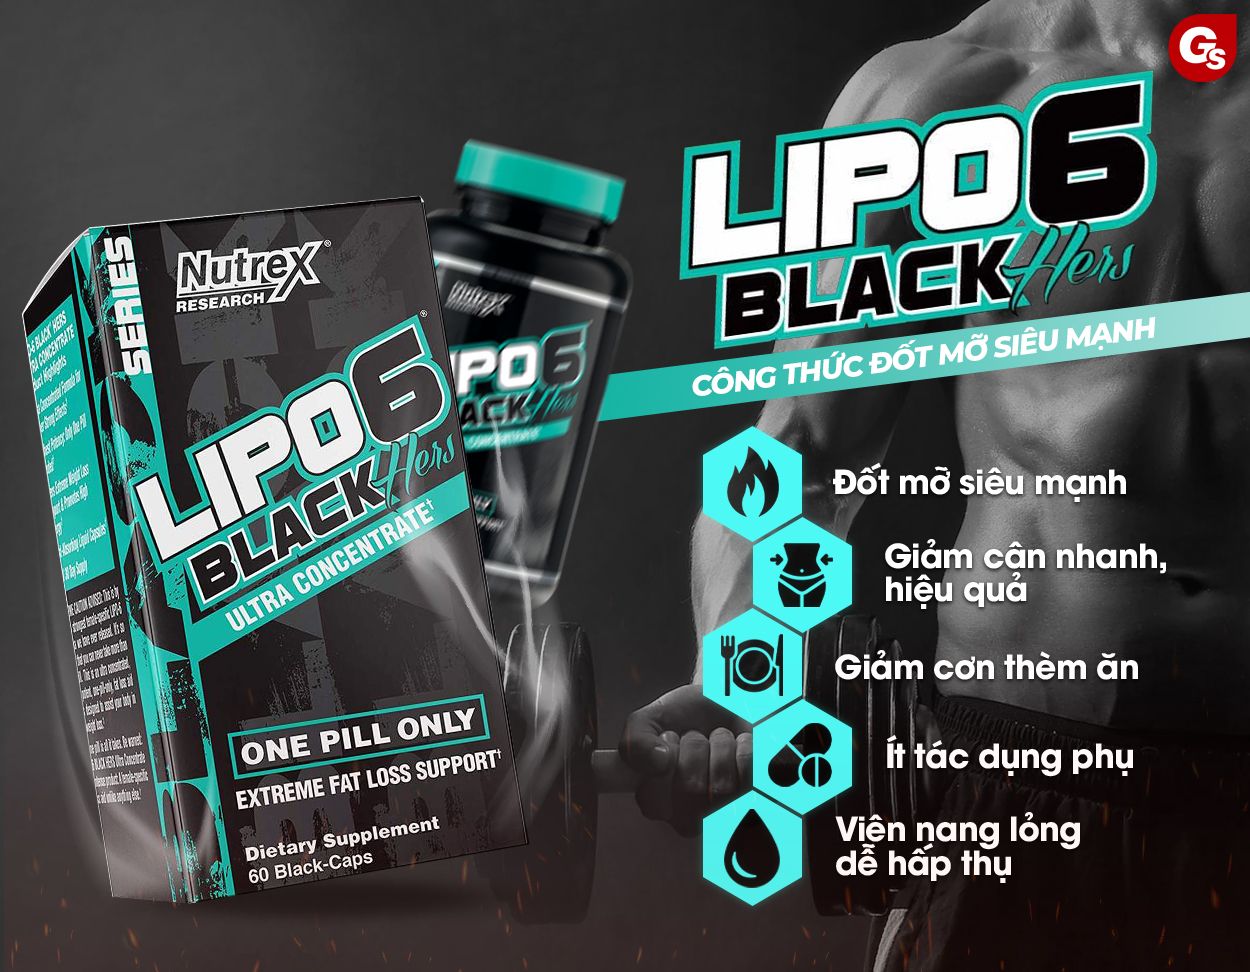 cong-dung-cua-lipo-6-black-hers-ultra-concentrate